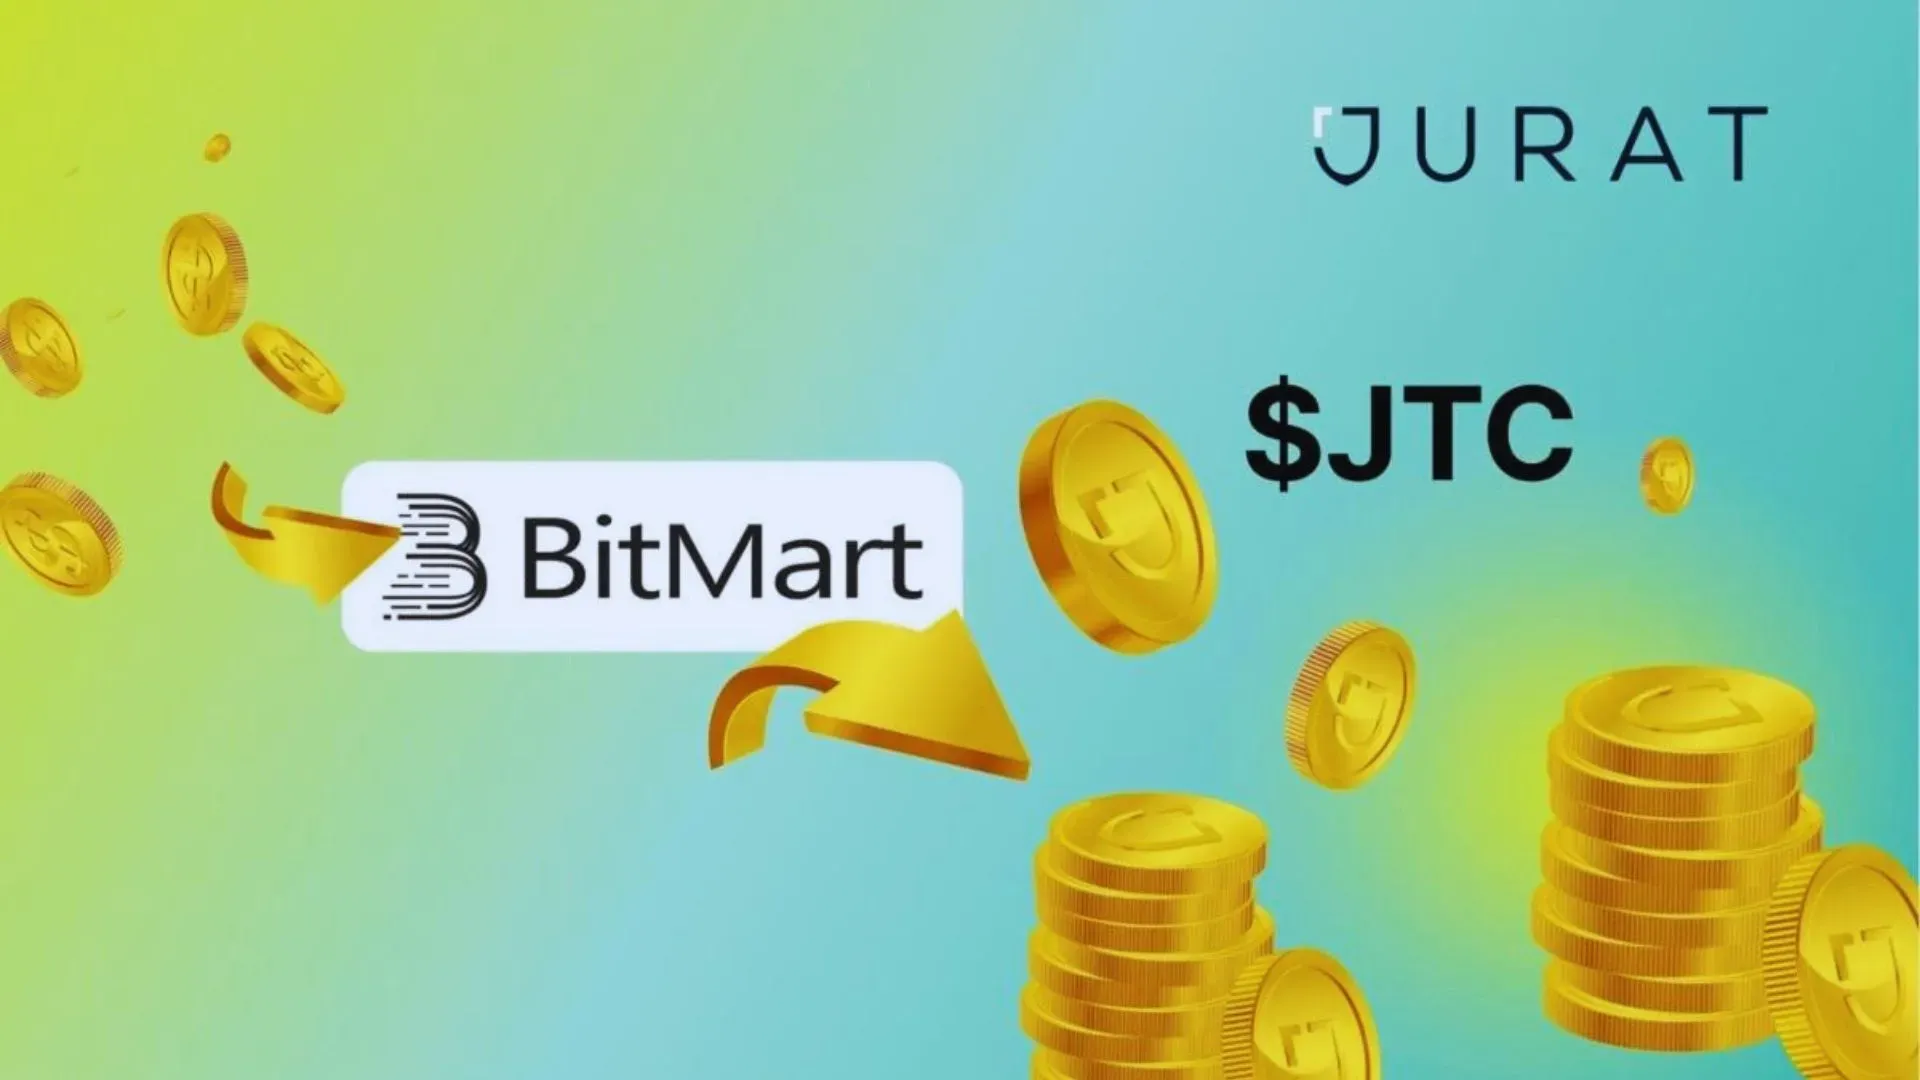 BitMart To List $JTC, Enhancing Legal Safety In Crypto